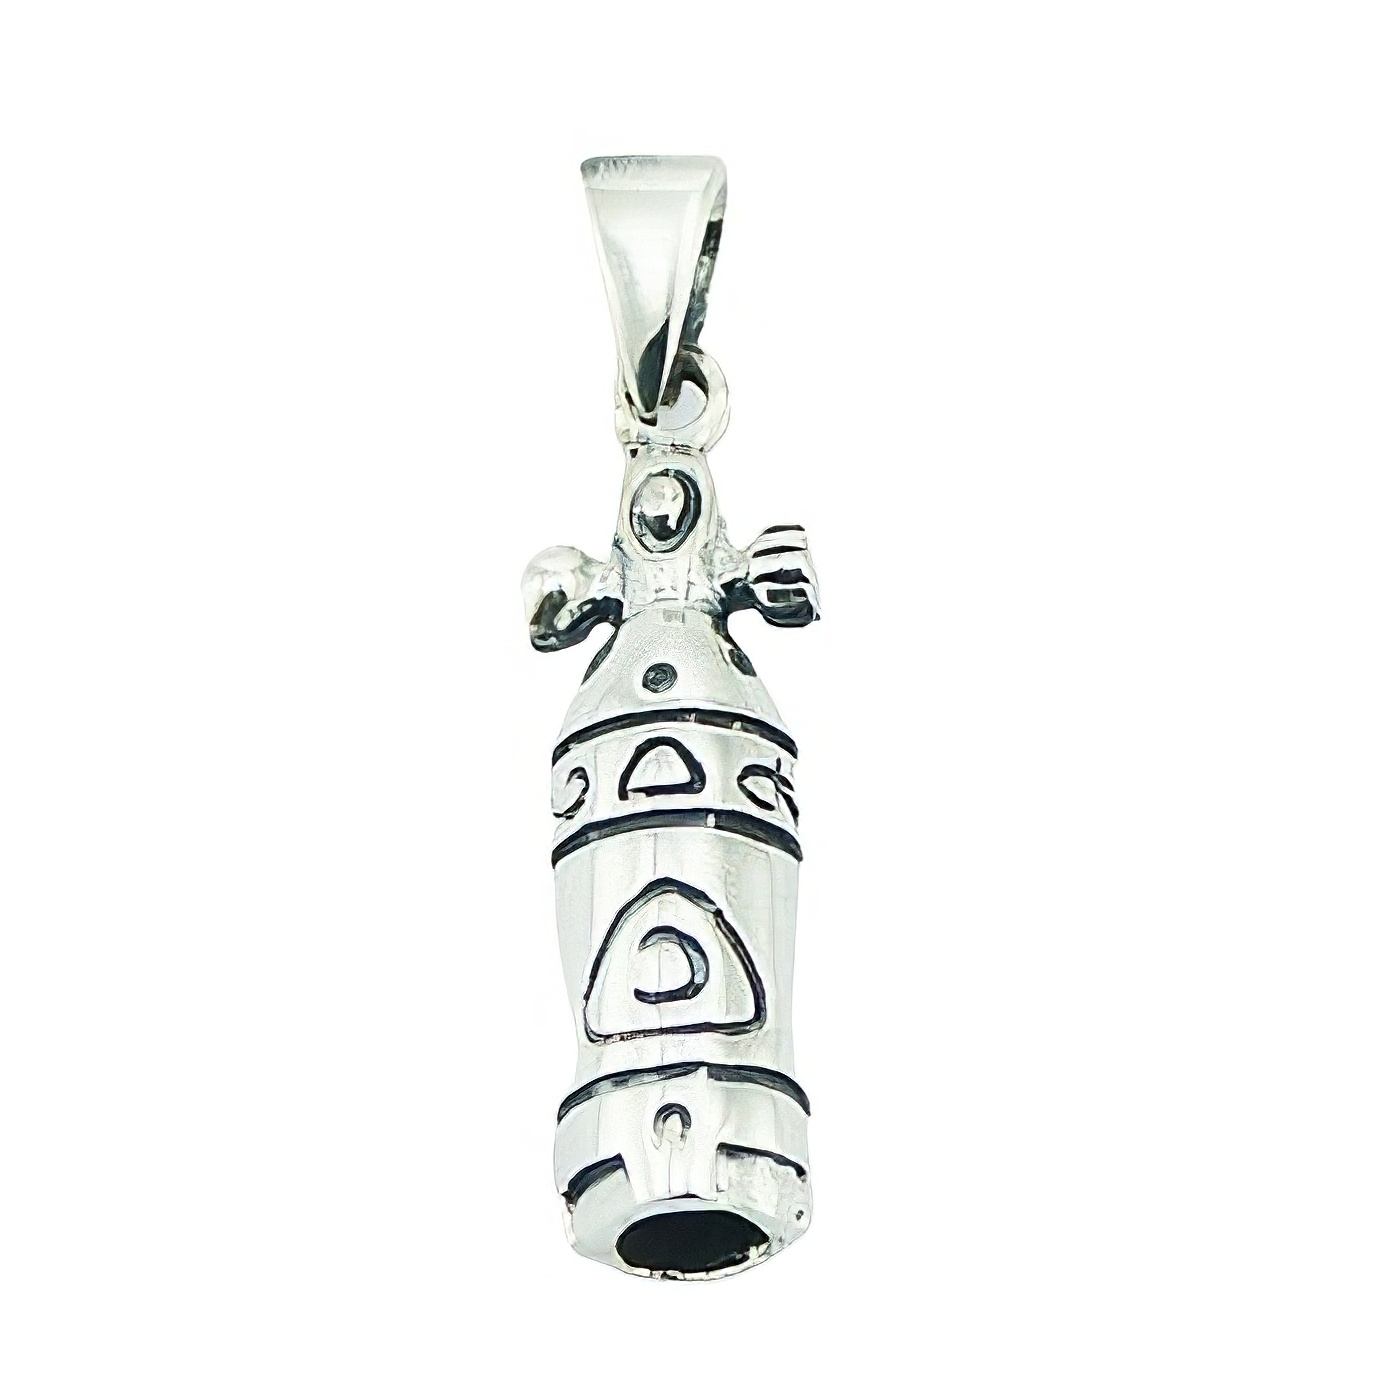 Totem Pole Charm Pendant Ethnic Sterling Silver Jewelry by BeYindi 